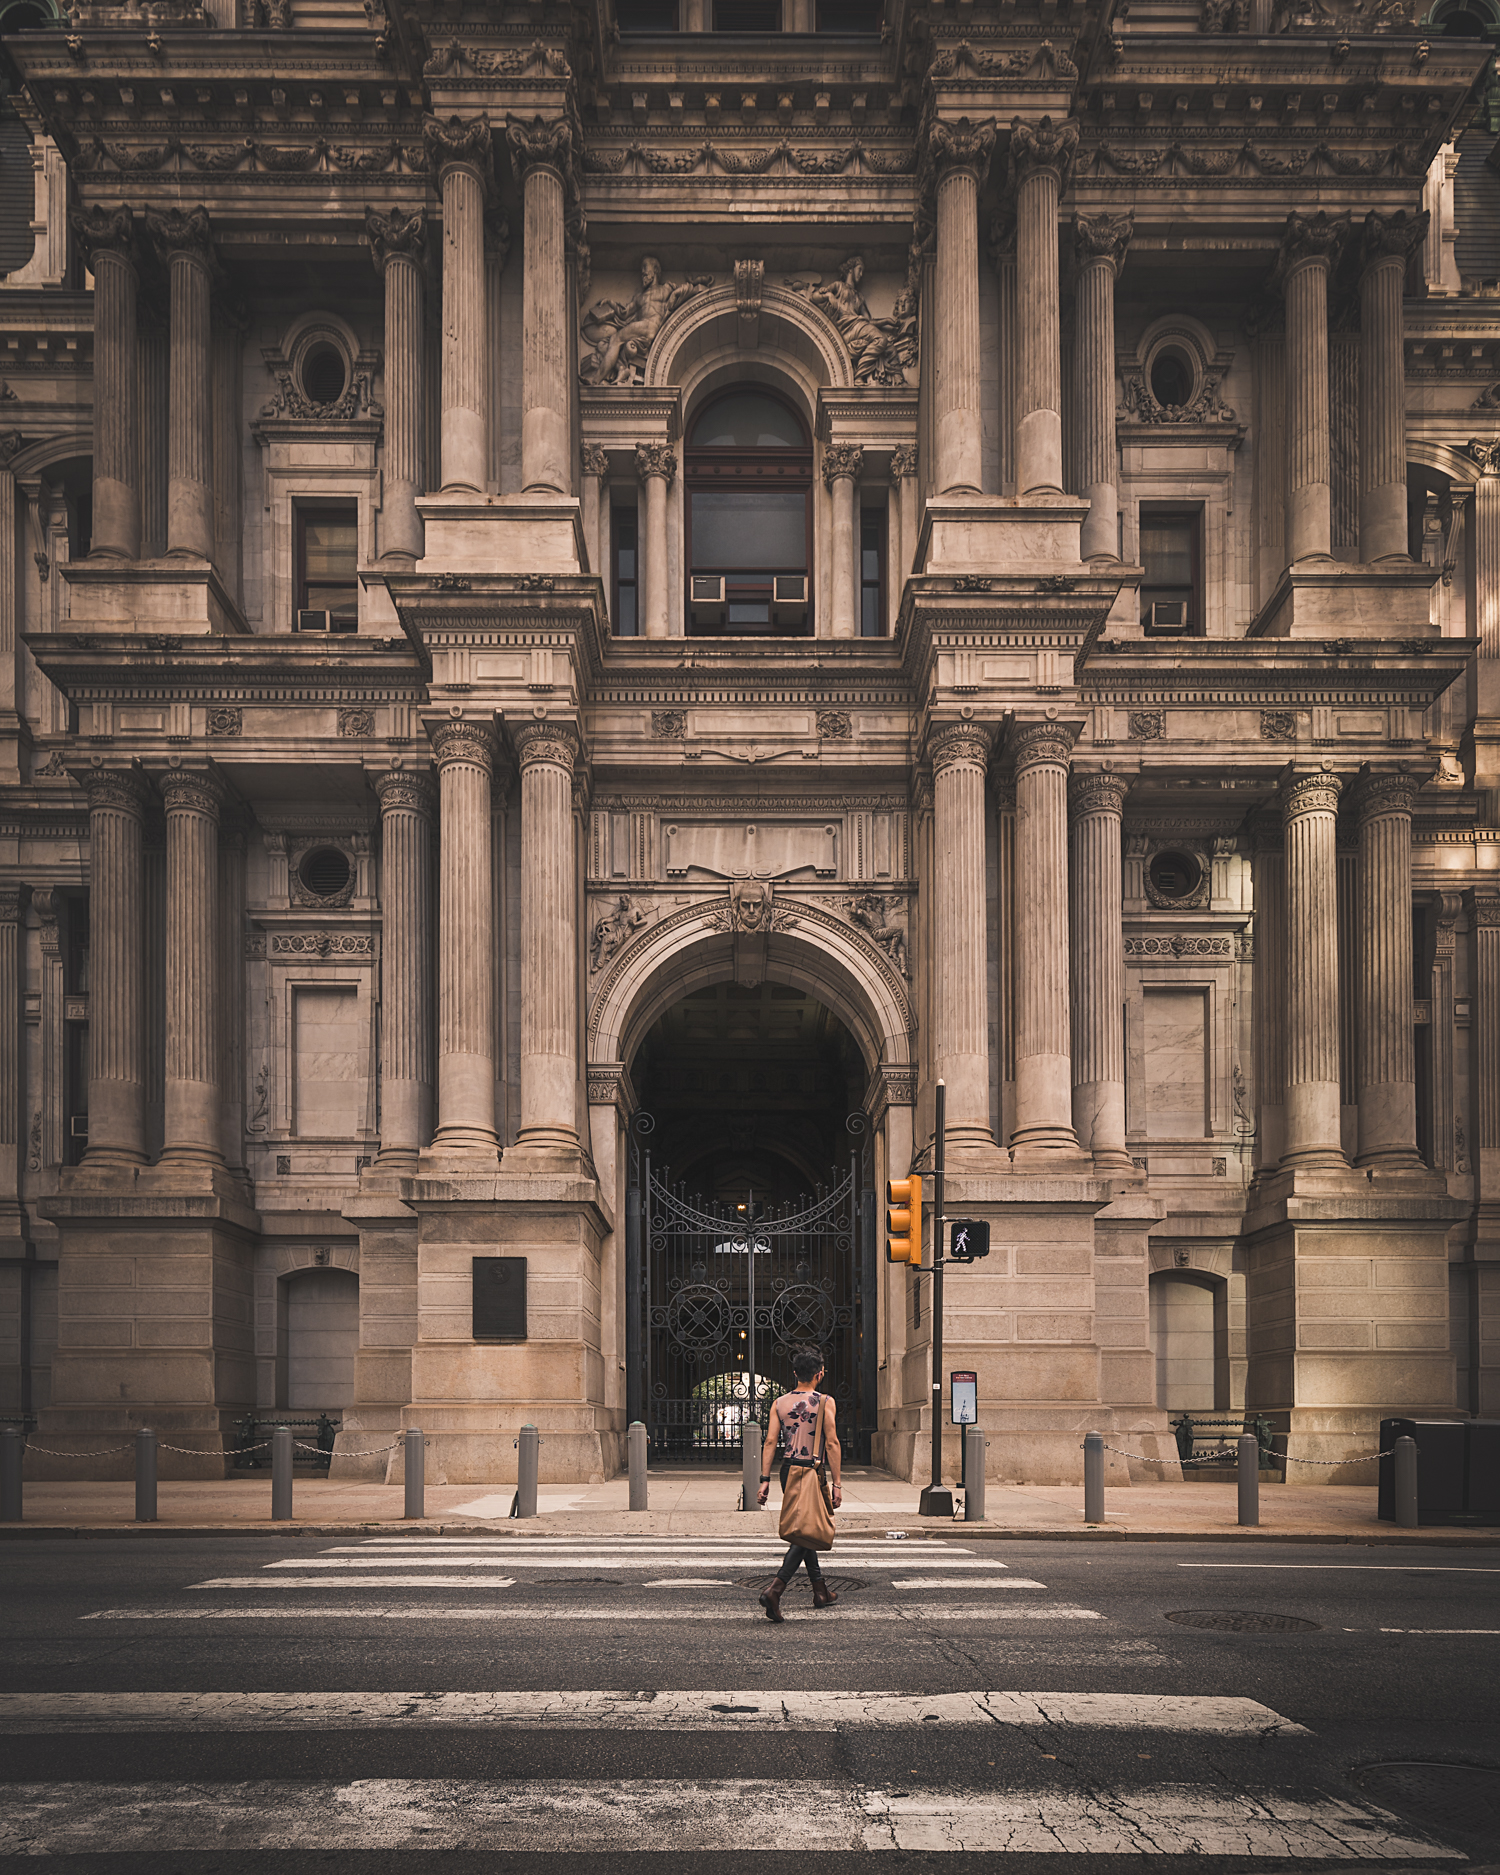 Man crossing the street in front of Philadelphia&rsquo; City Hall